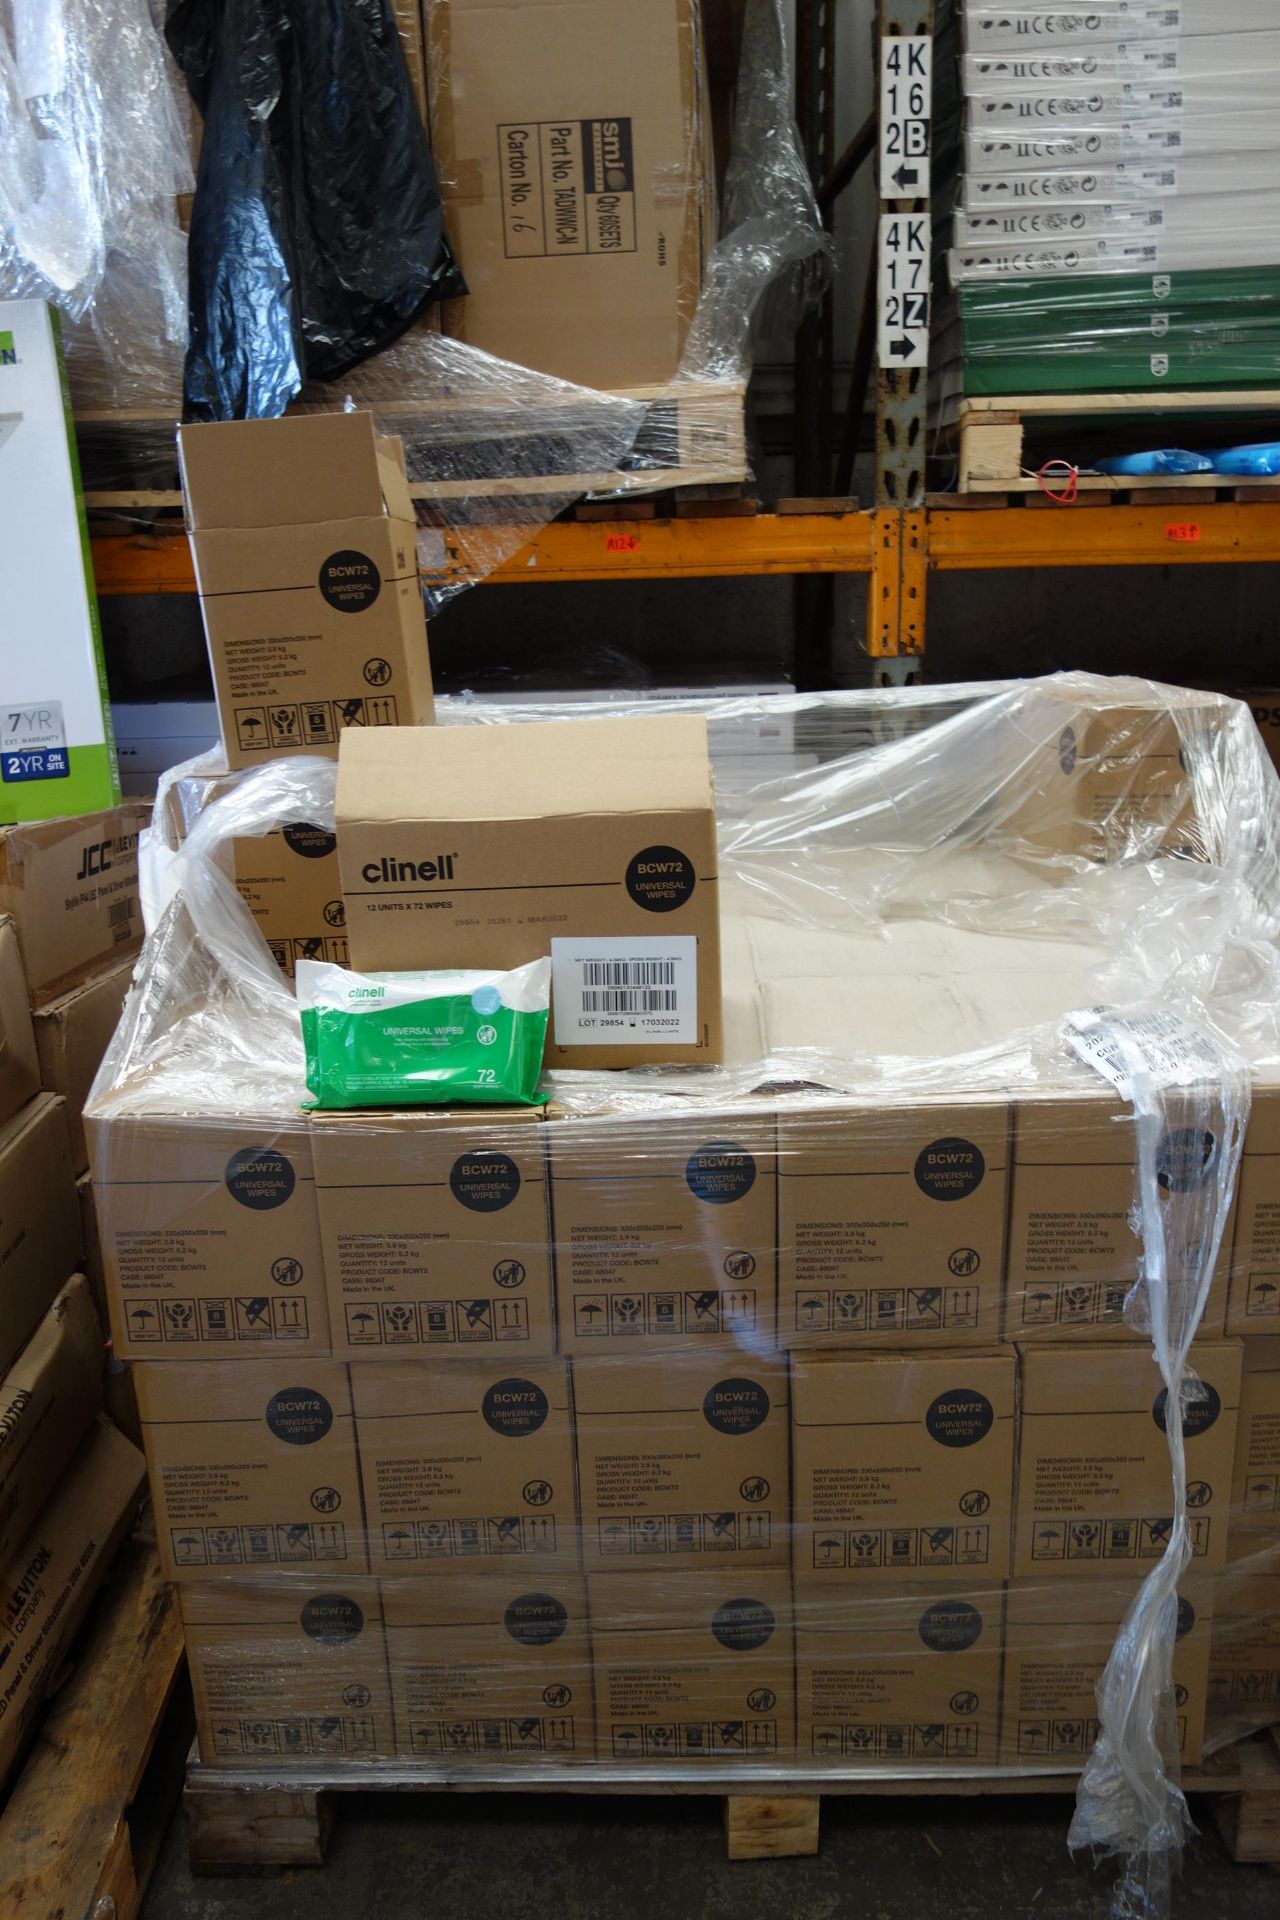 1 X Pallet Of Clinell Universal Wipes 72 Boxes of 12 Total 864 for cleaning & Disinfecting Hands,